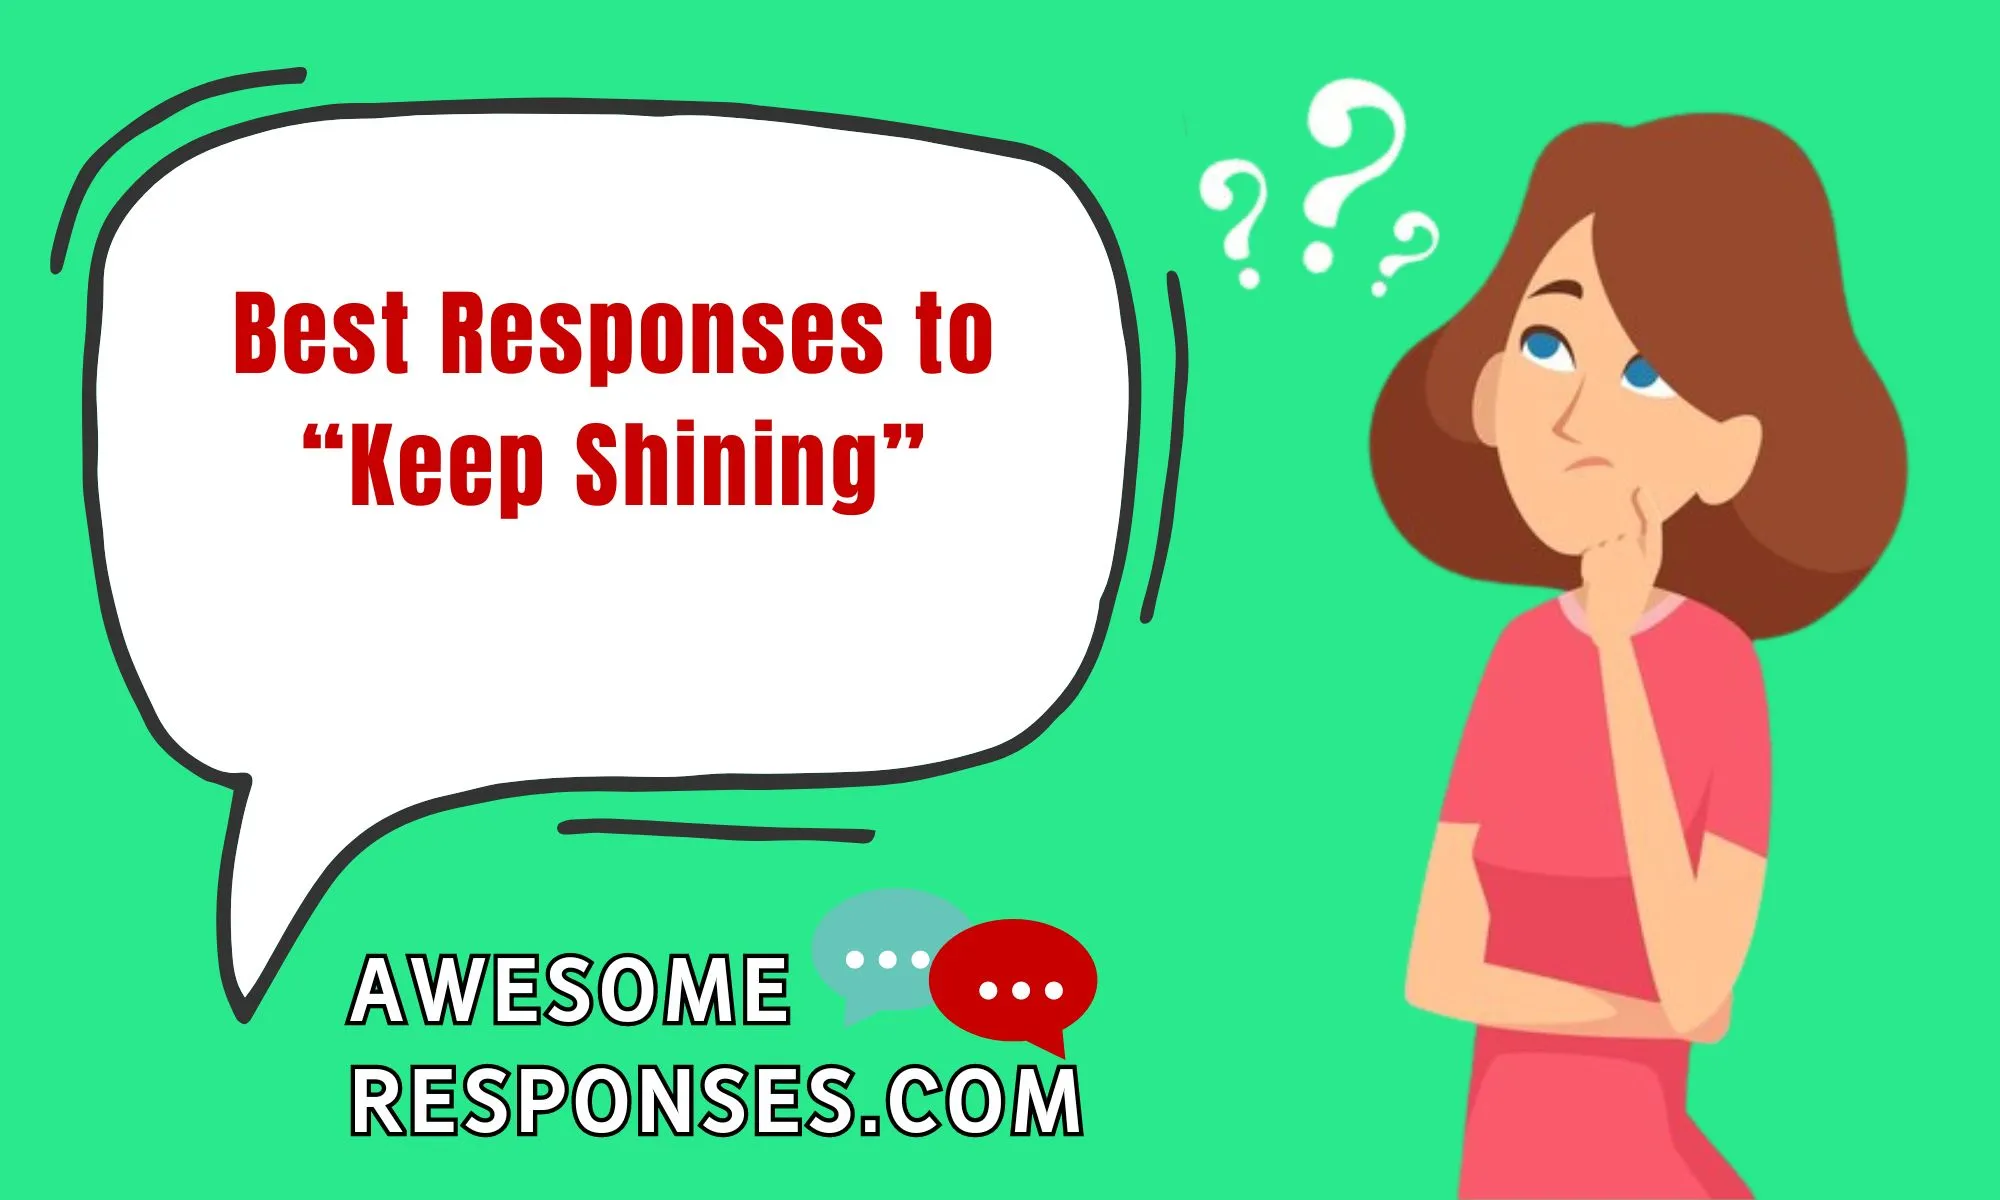 Best Responses to “Keep Shining”